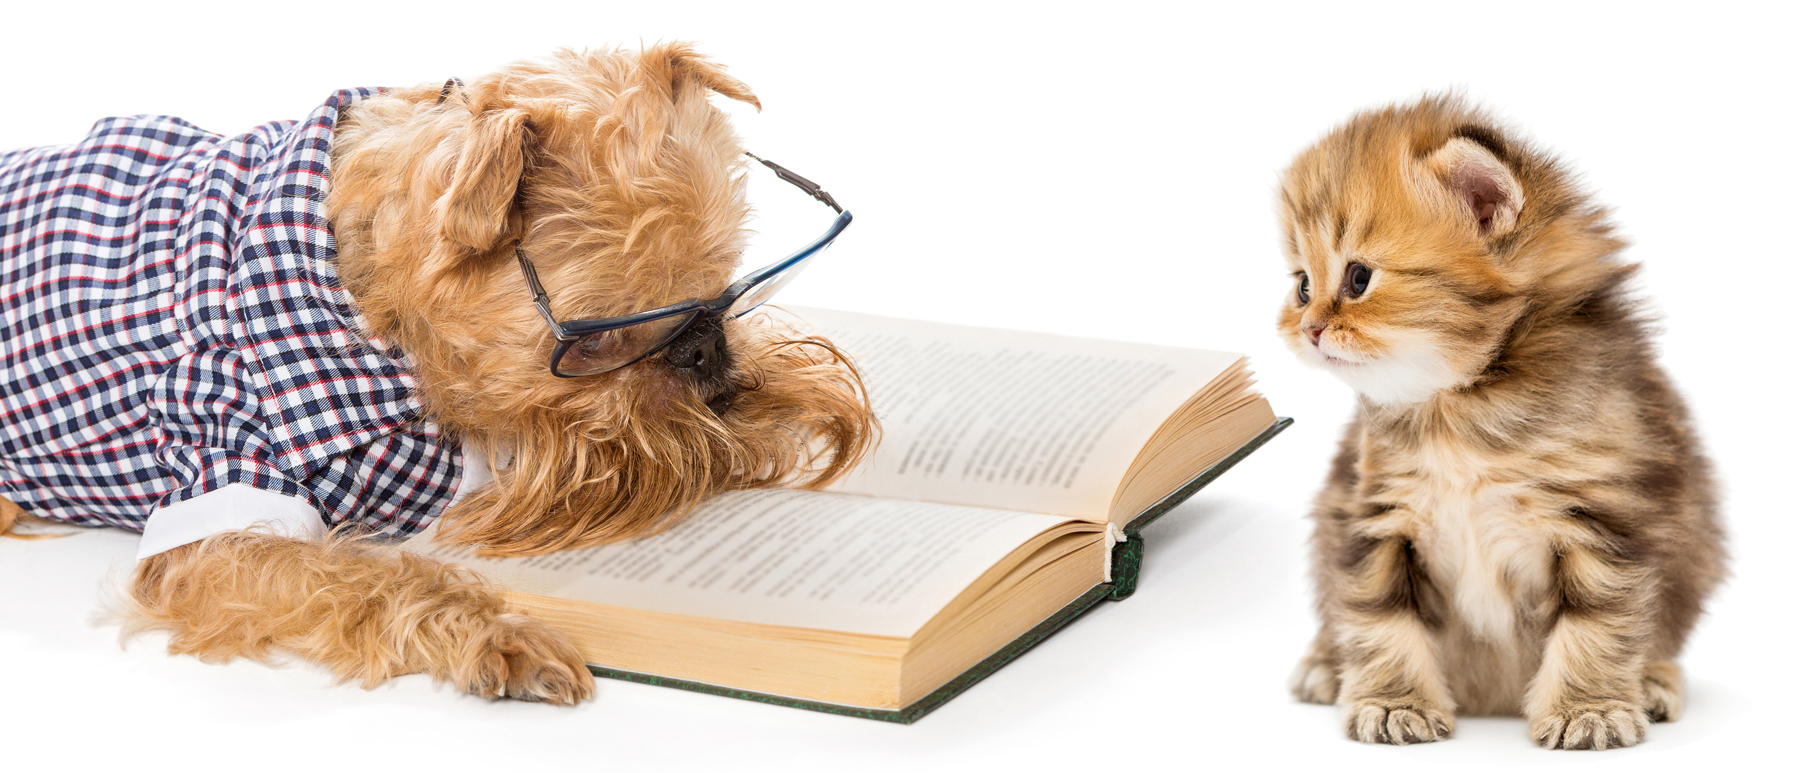 A dog in a shirt and glasses on reading a book to a kitten